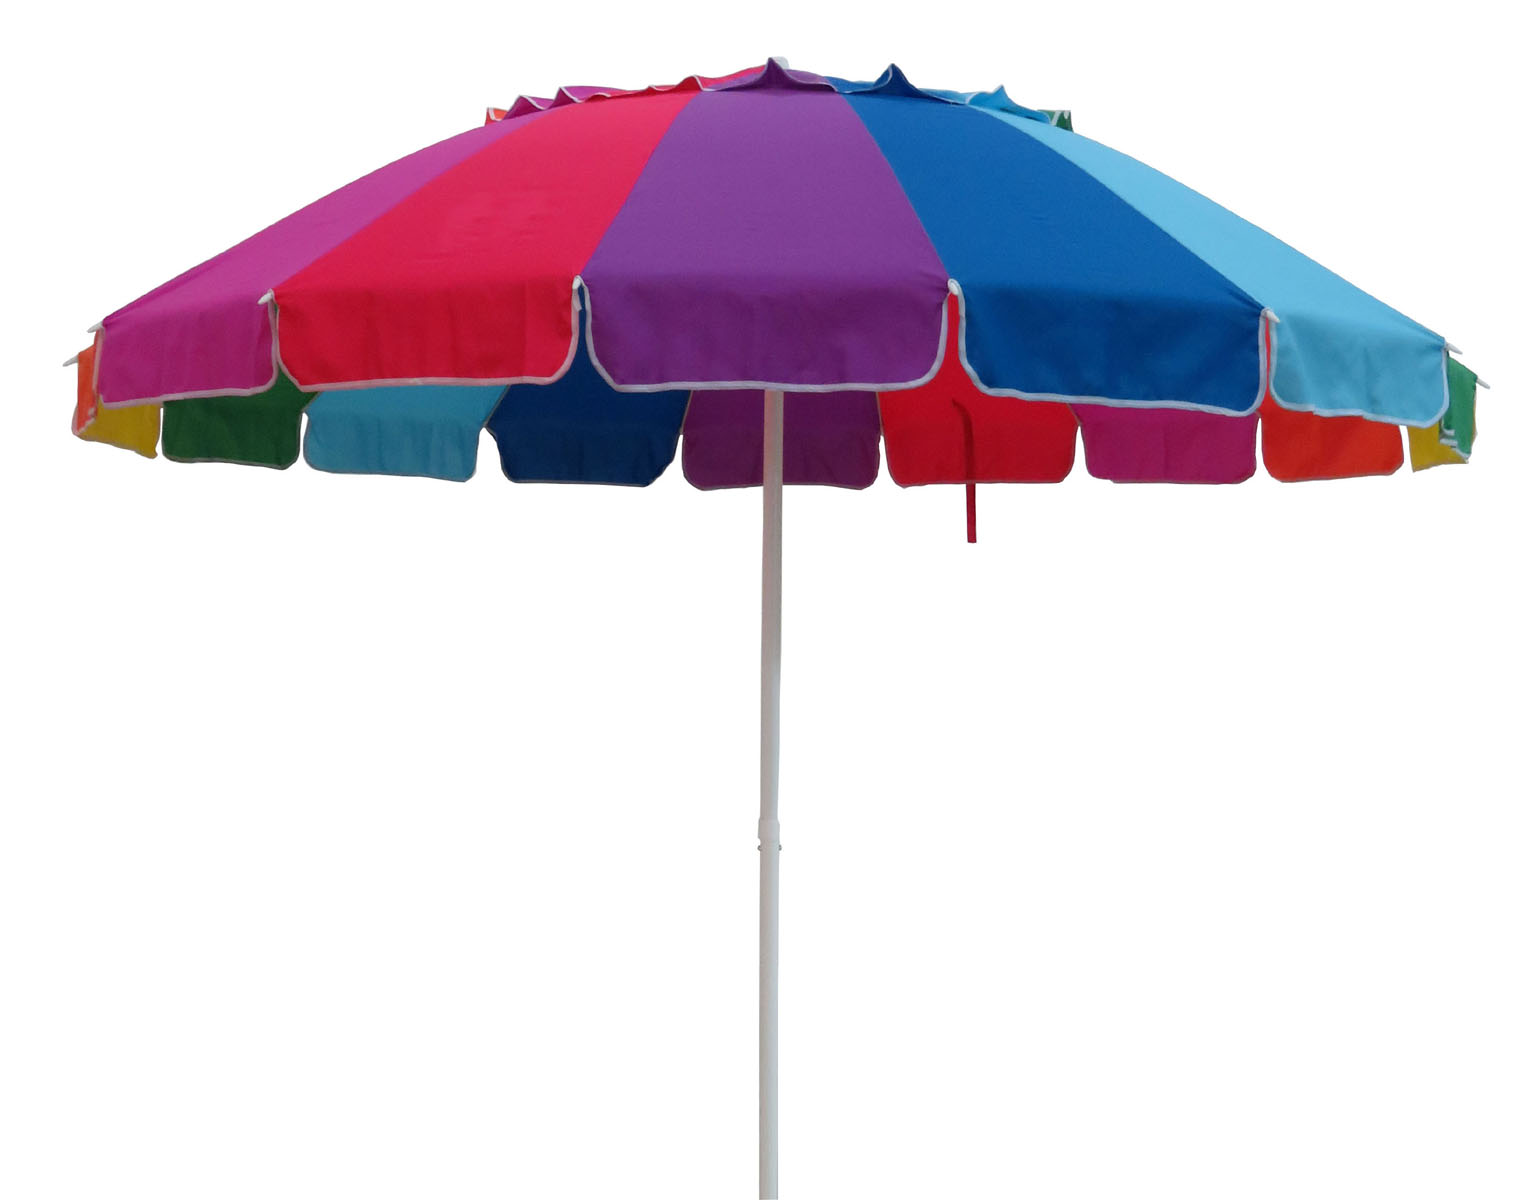 Mainstays 8 ft. Vented Tilt Rainbow Beach Umbrella with UV Protection - image 5 of 5